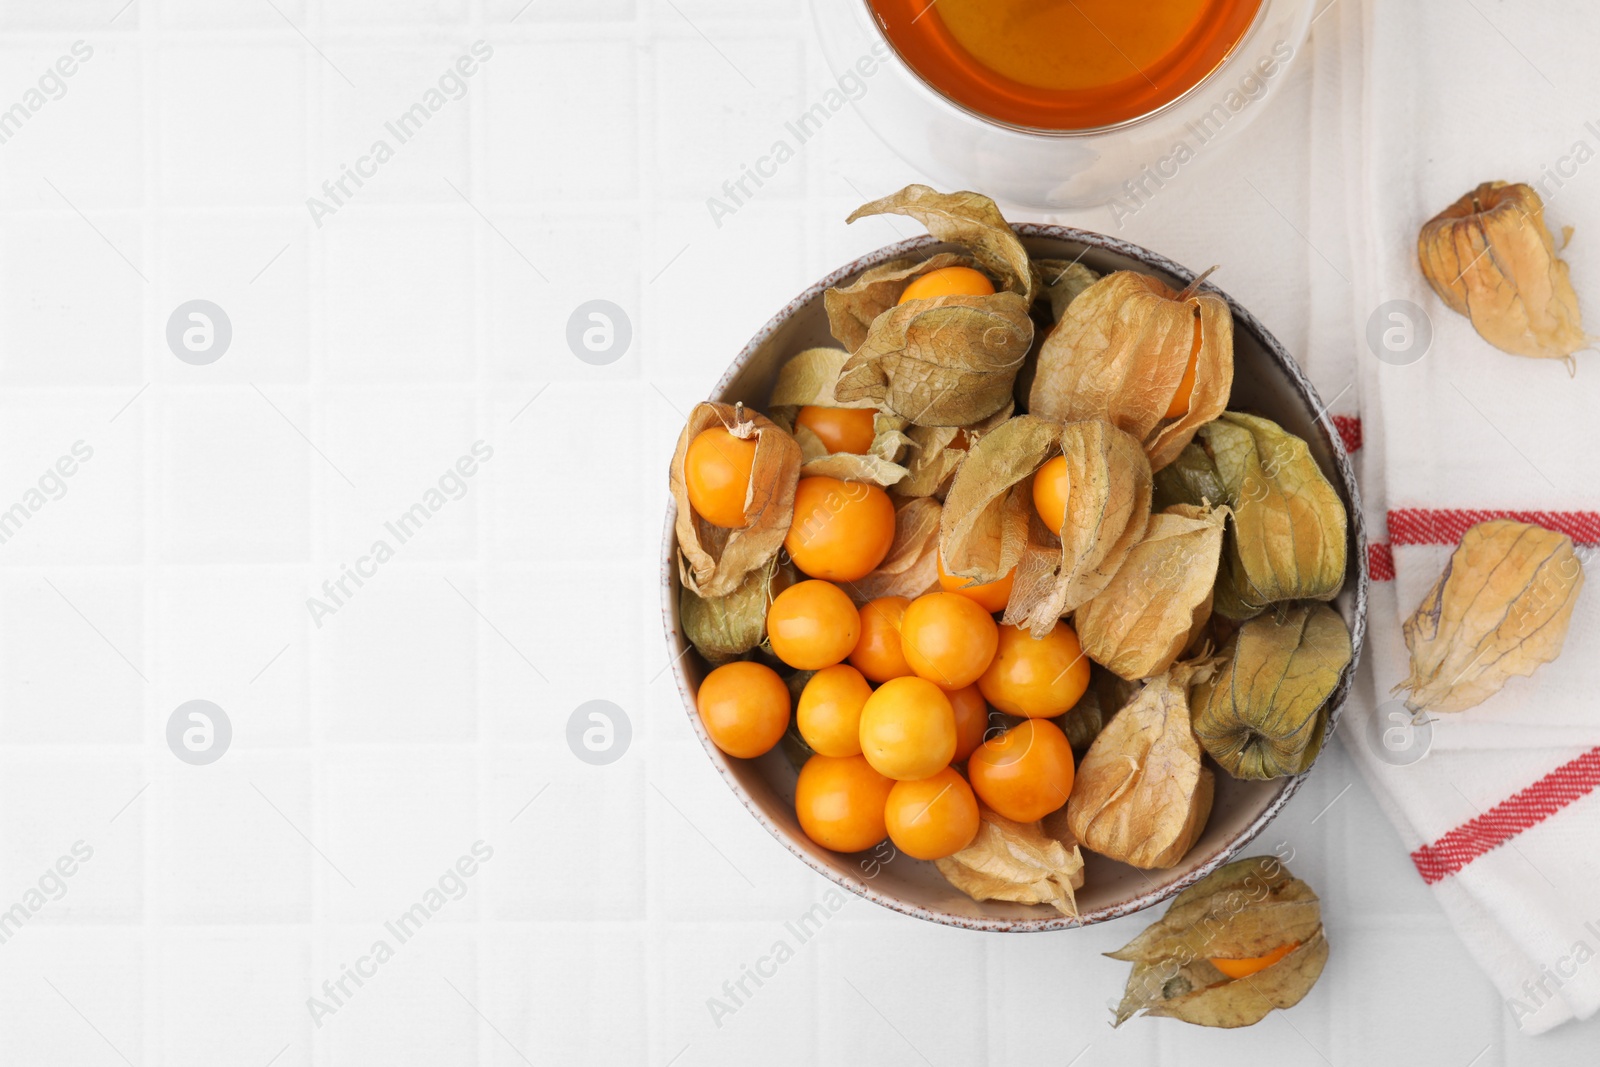 Photo of Ripe physalis fruits with calyxes in bowl on white tiled table, top view. Space for text